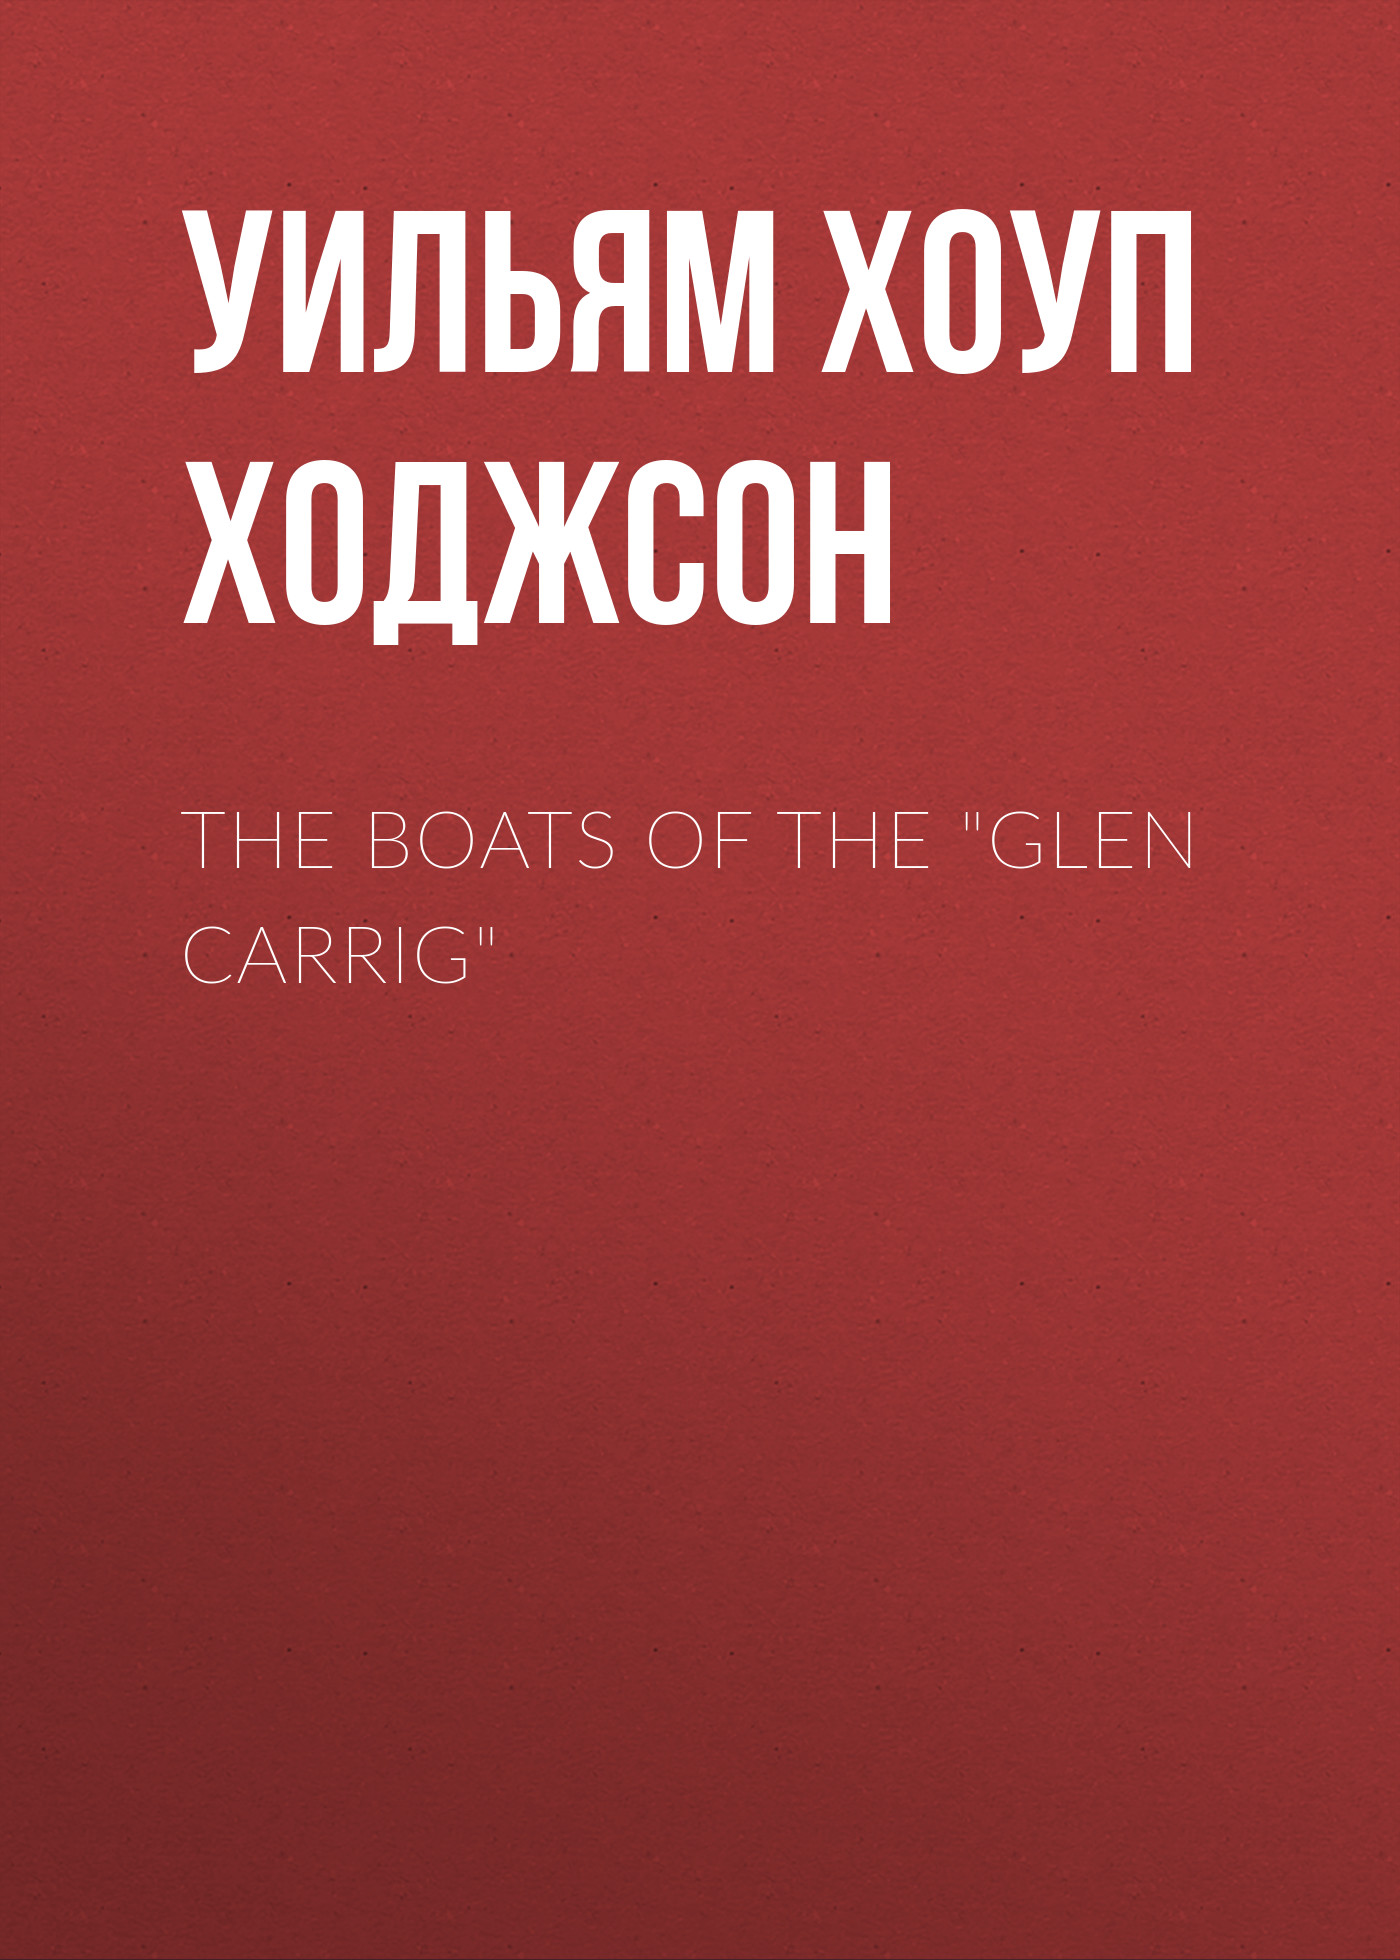 The Boats of the"Glen Carrig"